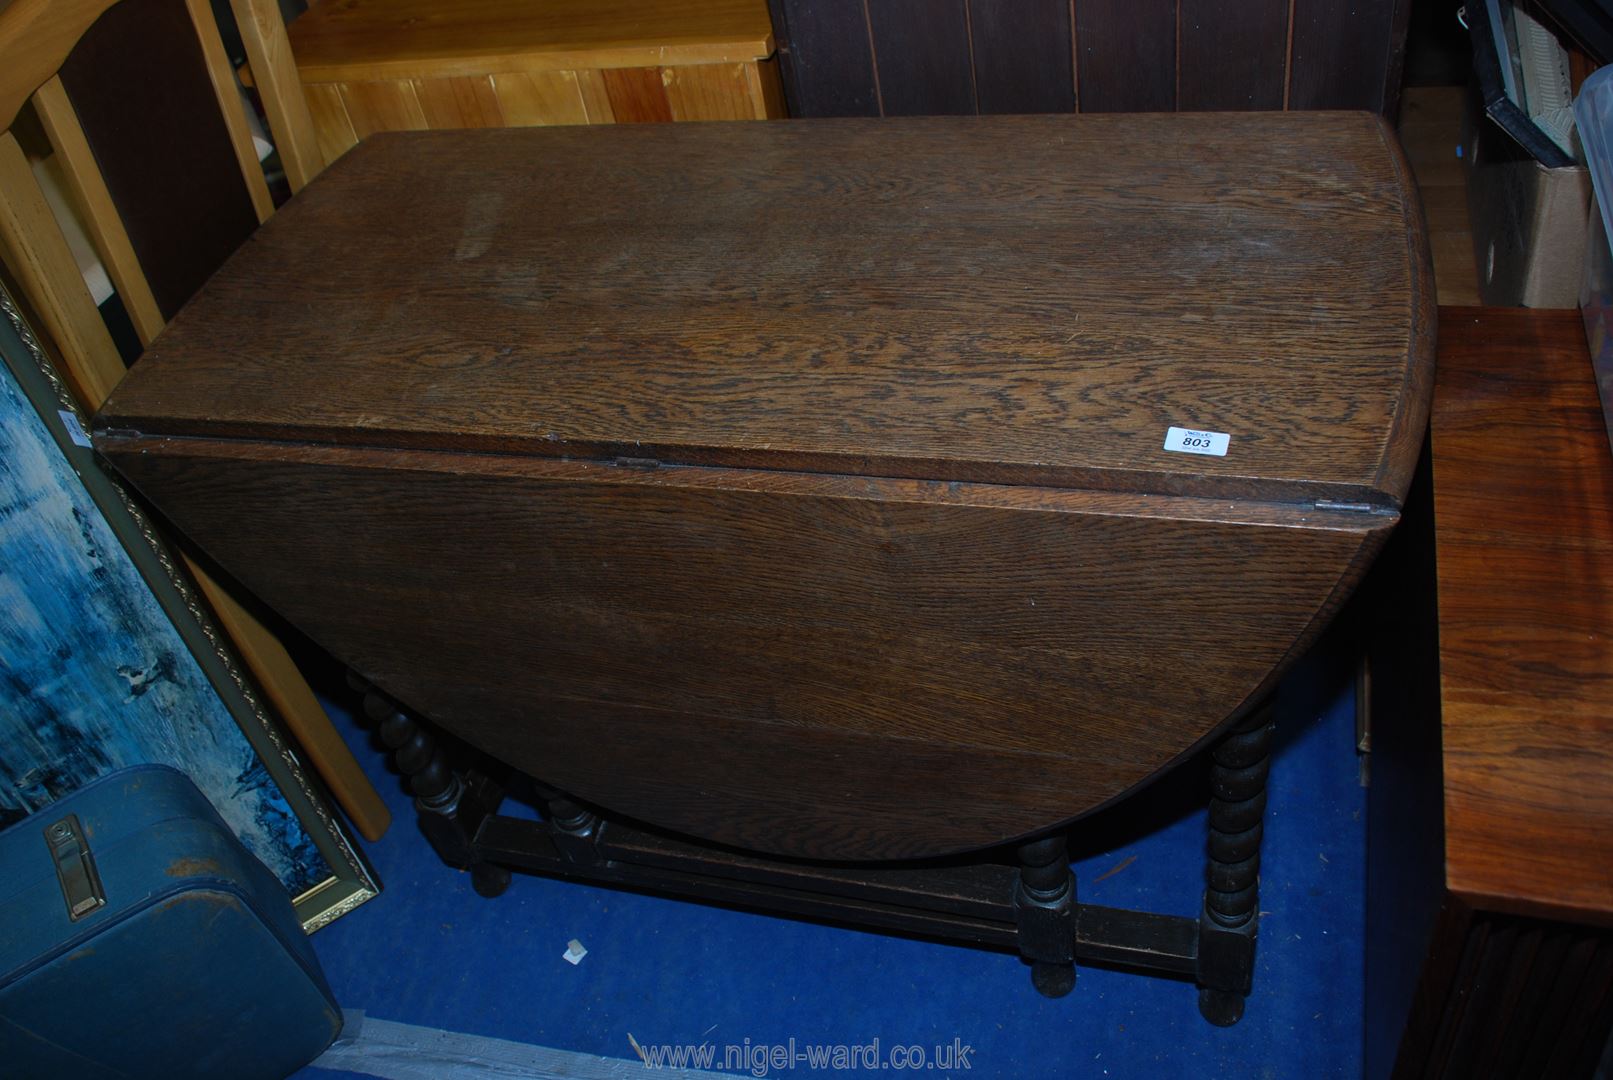 A drop leaf table with barley twist legs 41 1/2" x 58" long (incl. leaves).